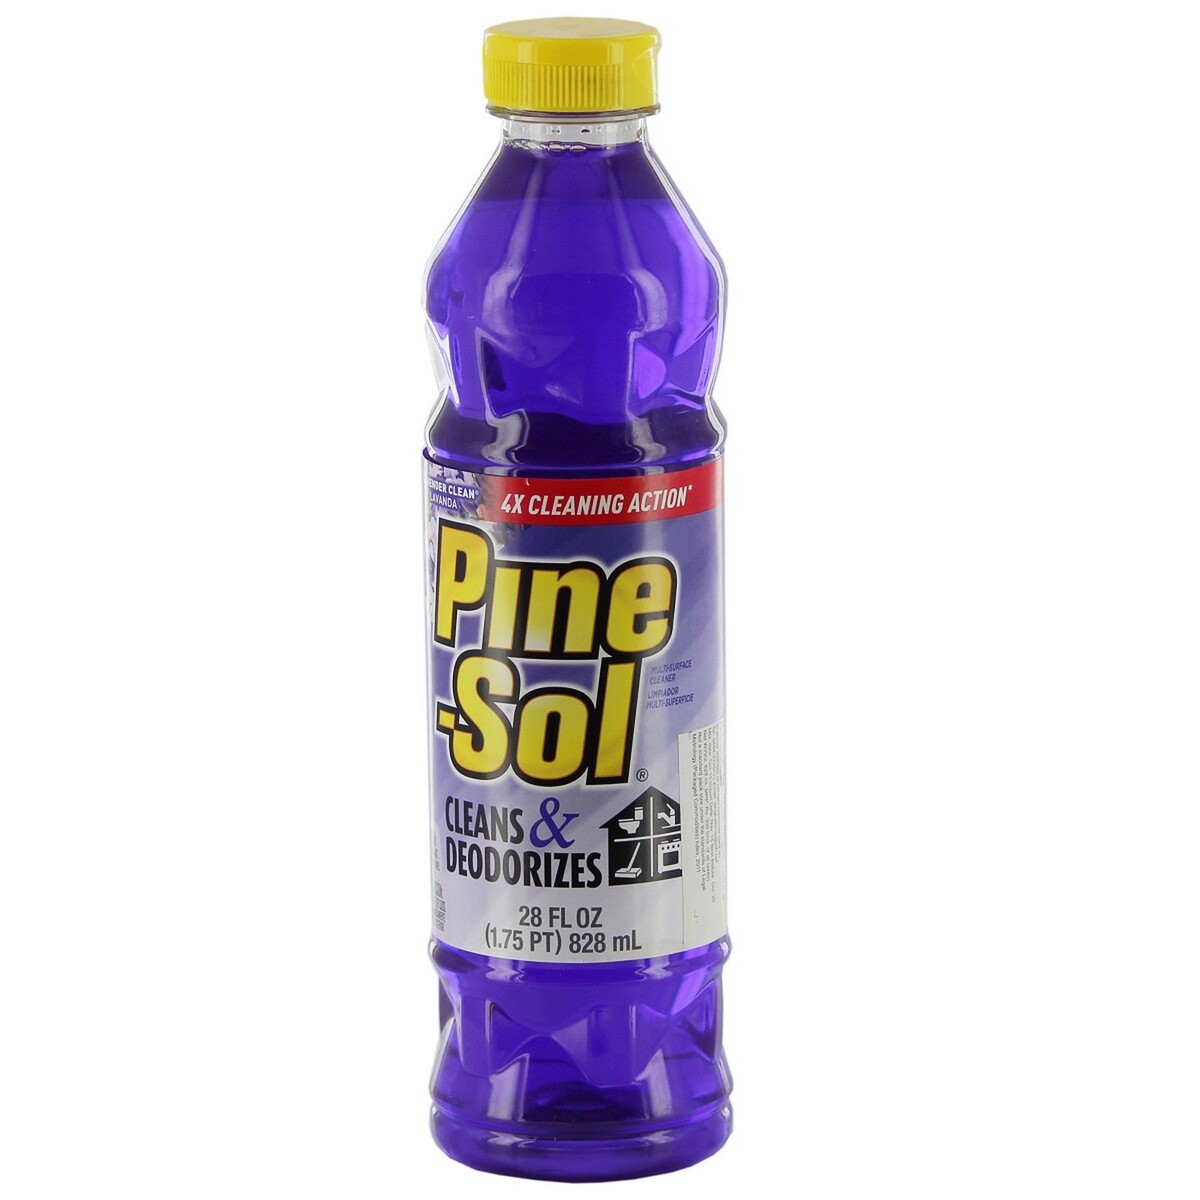 Pine-Sol Multi Surface Cleaner 828ml